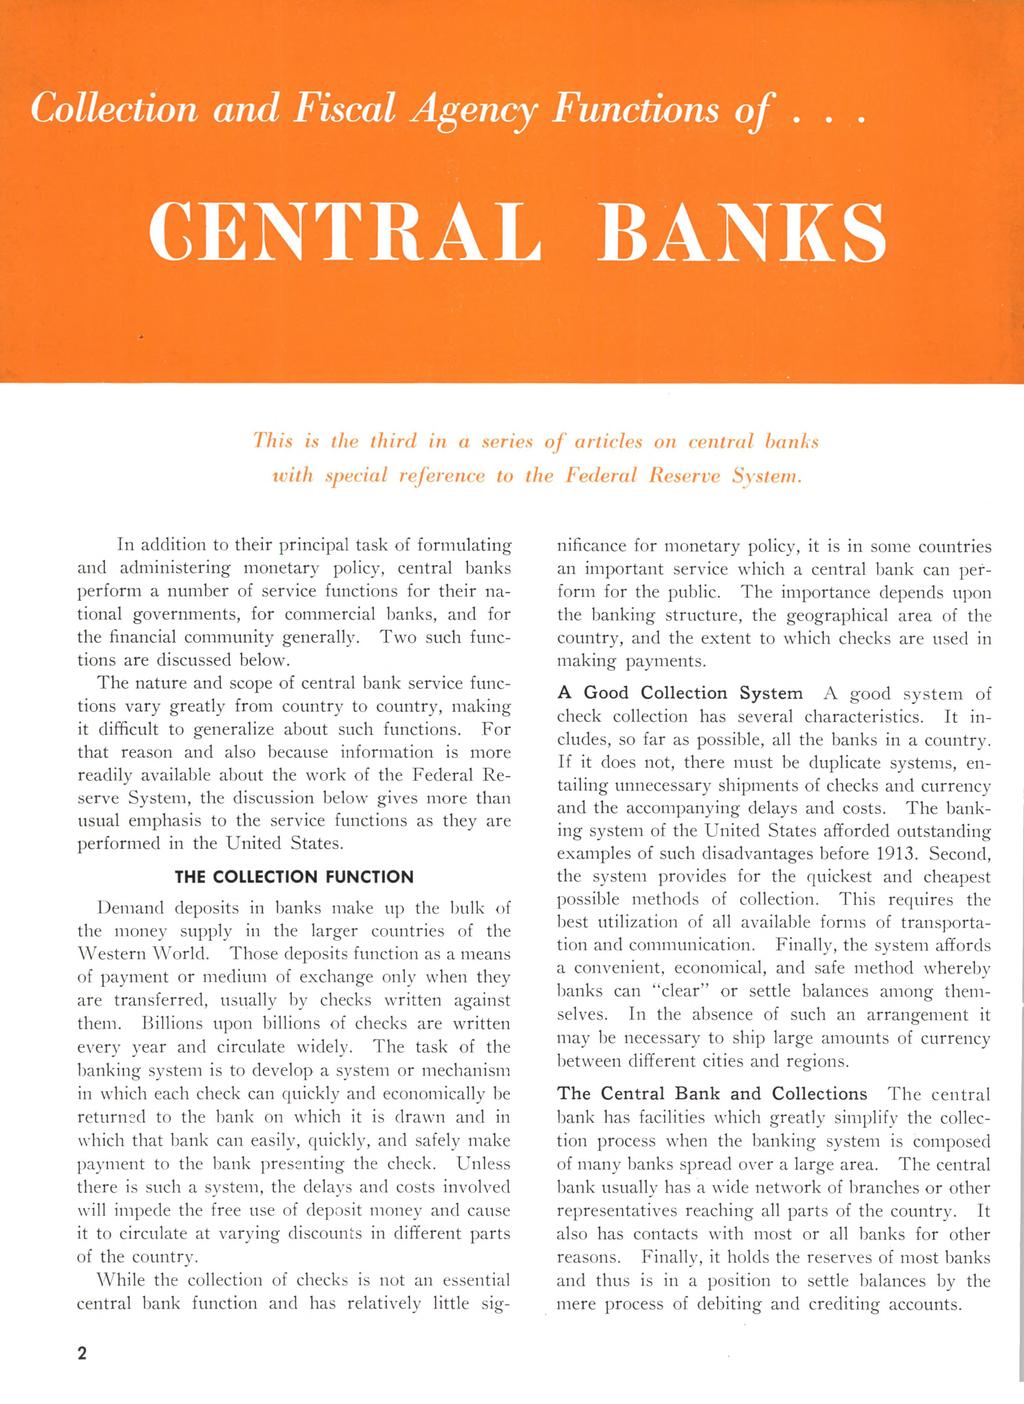 2 Collection and Fiscal Agency Functions of... GENTRAL BANKS This is the third in a series o f articles on central banks ivith special reference to the Federal Reserve System.